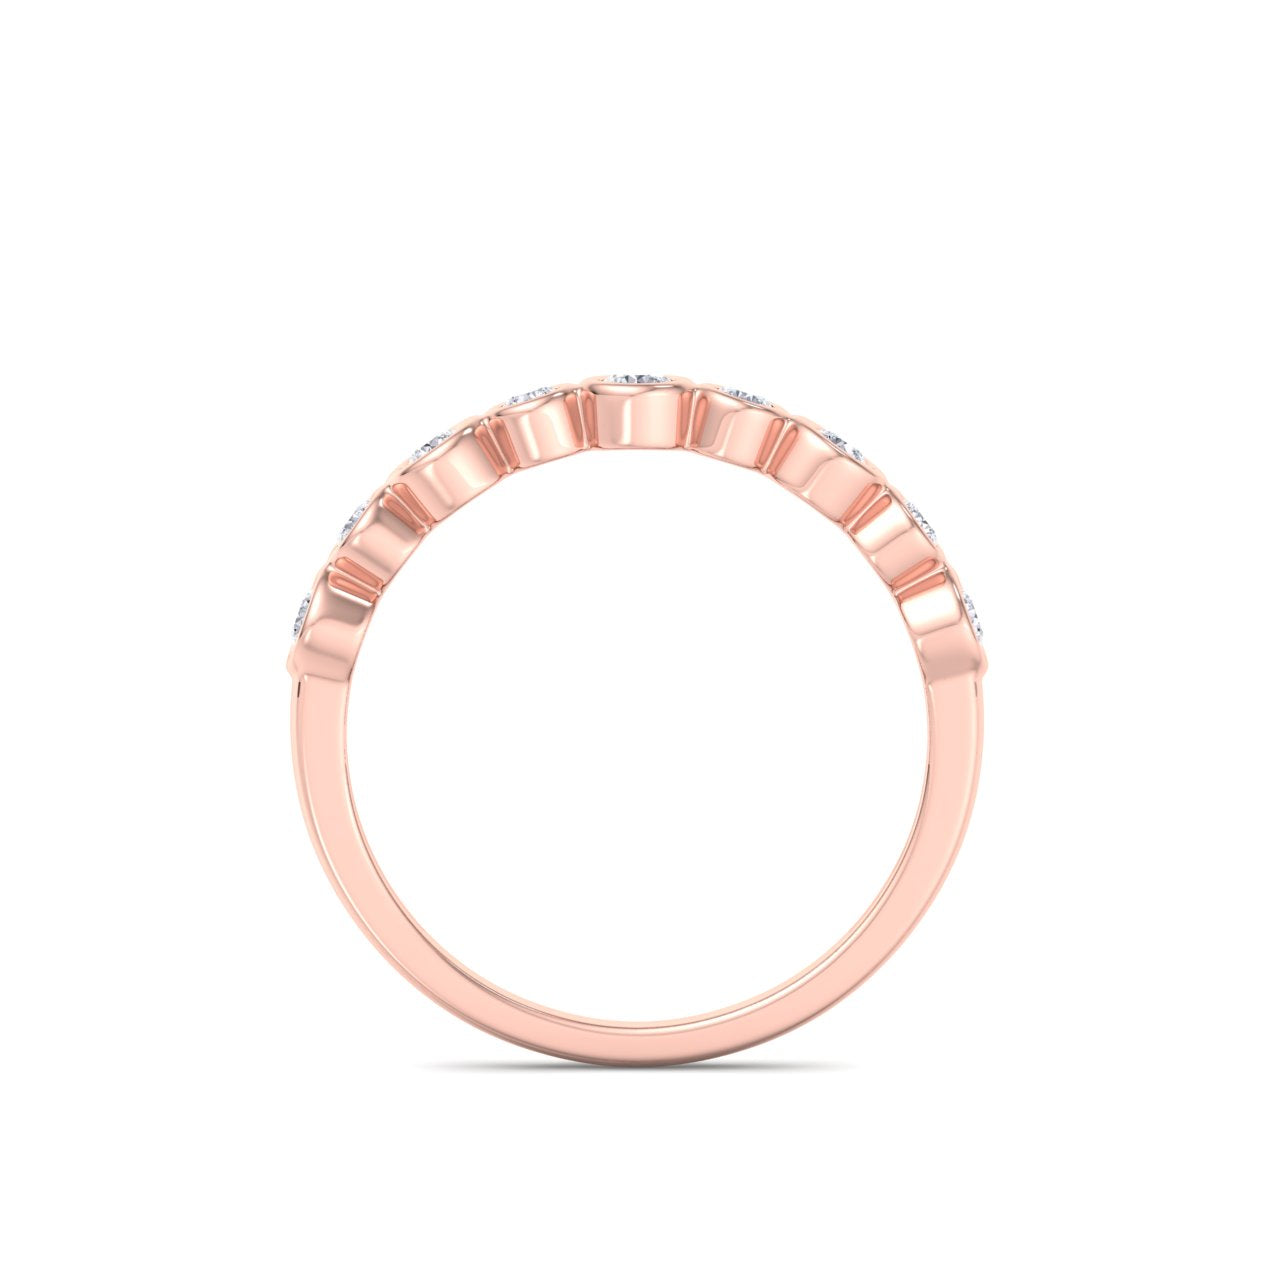 Wedding band in rose gold with white diamonds of 0.25 ct in weight